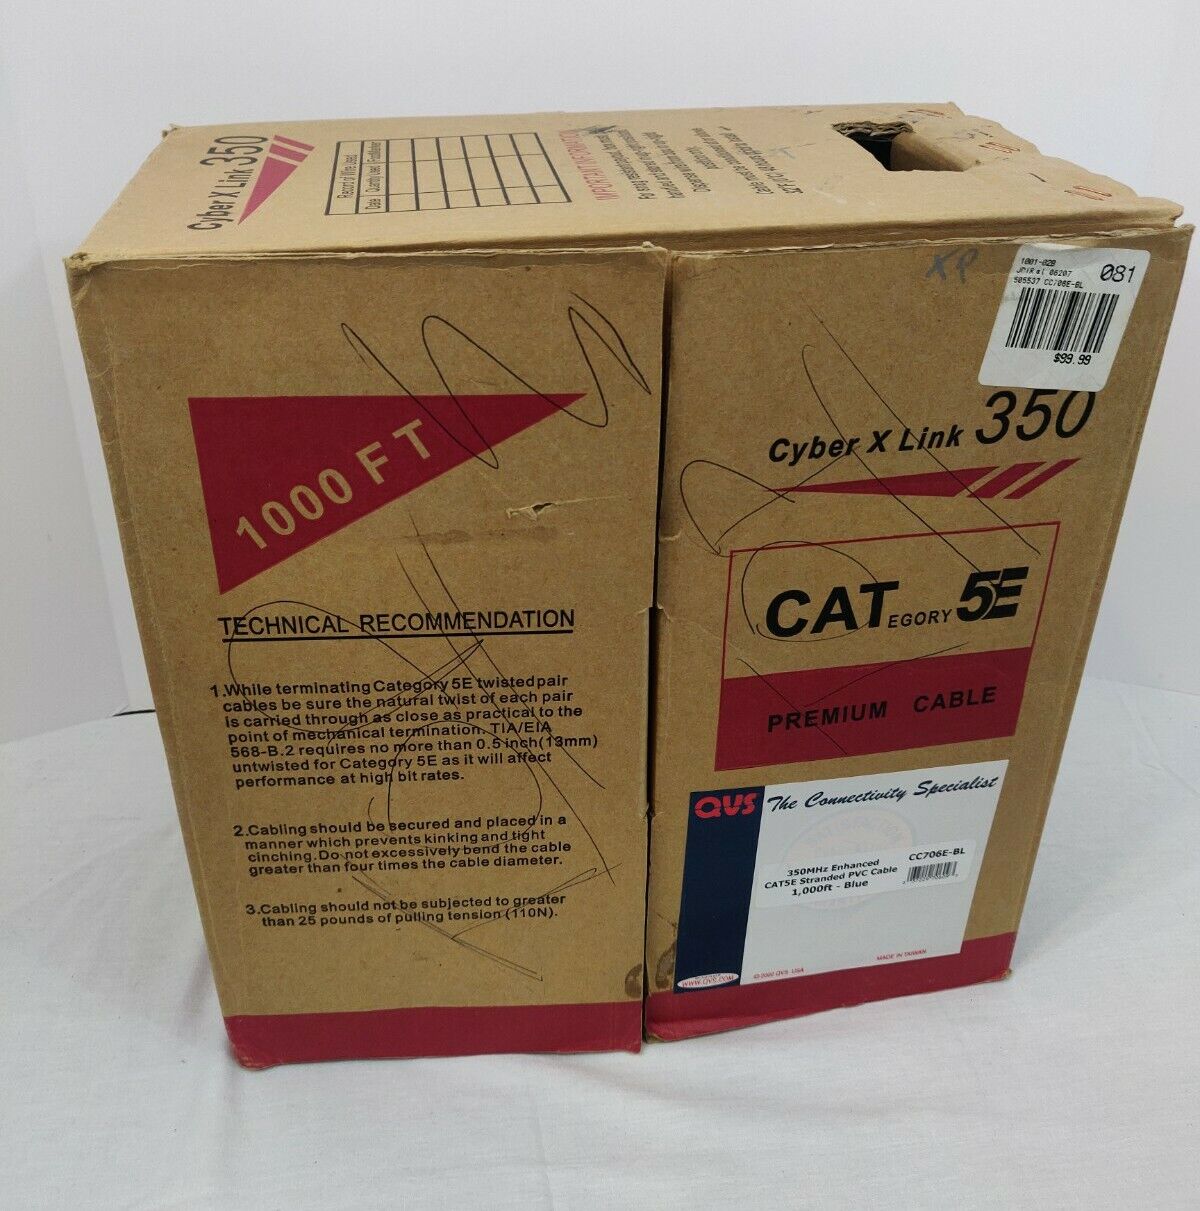 Cyber X Link Enhanced Cat 5E 350 MHz Cable - UTP, CMR, Stranded, 24 AWG, 4 Pair